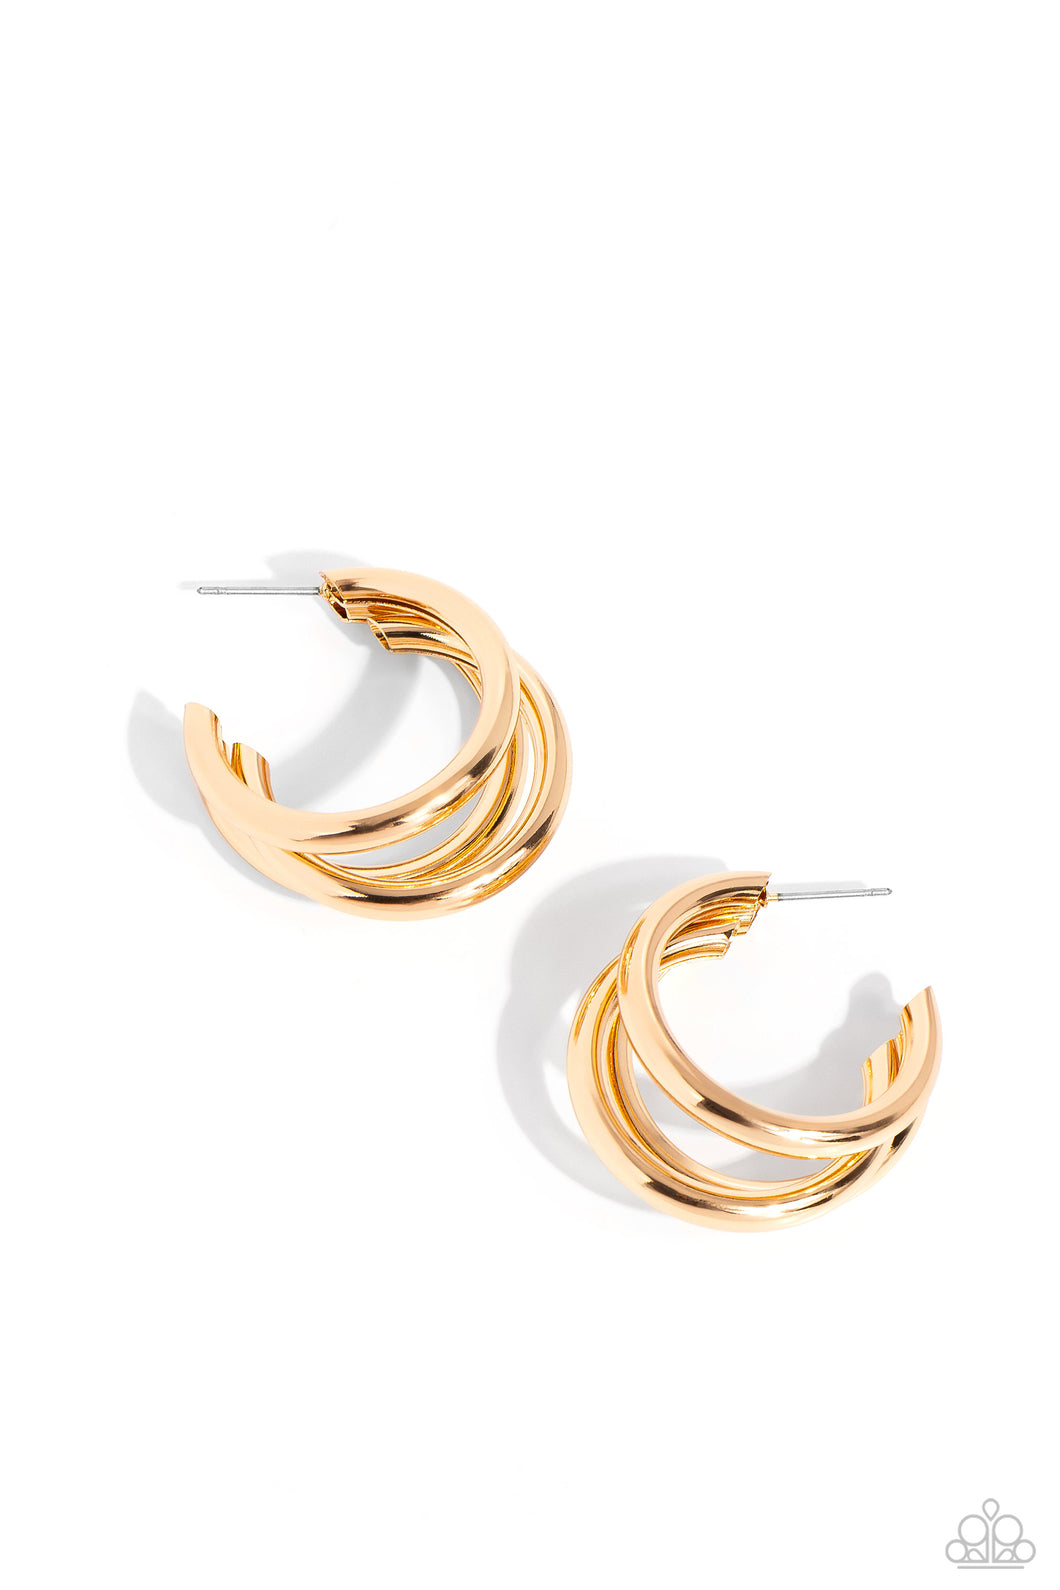 oak-sisters-jewelry-hoop-of-the-day-gold-earrings-paparazzi-accessories-by-lisa